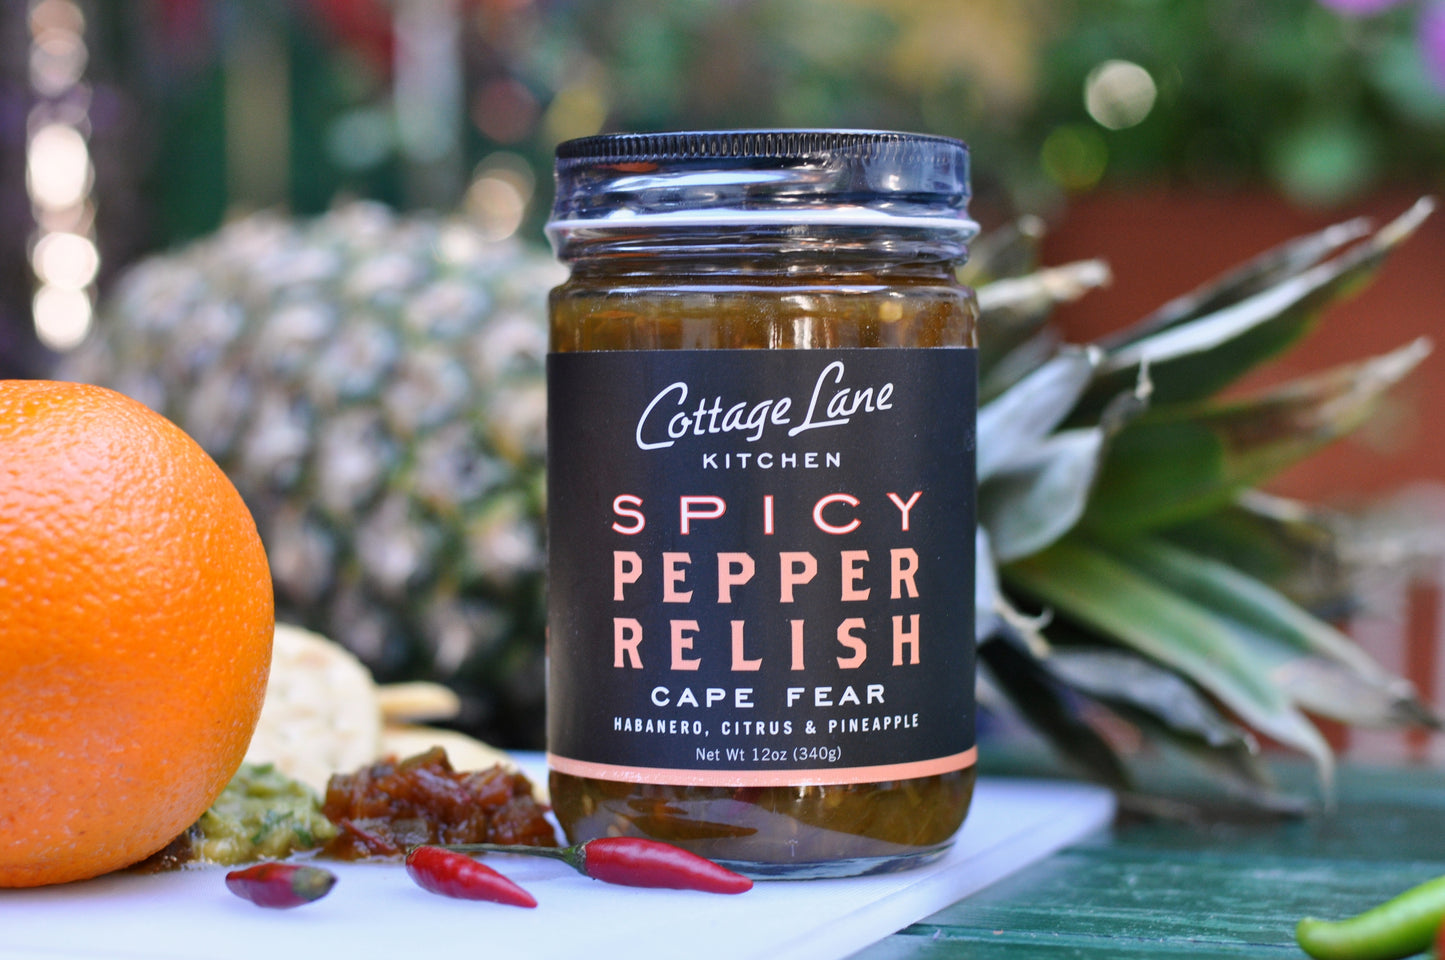 Cape Fear Spicy Pepper Relish is made with fresh ingredients